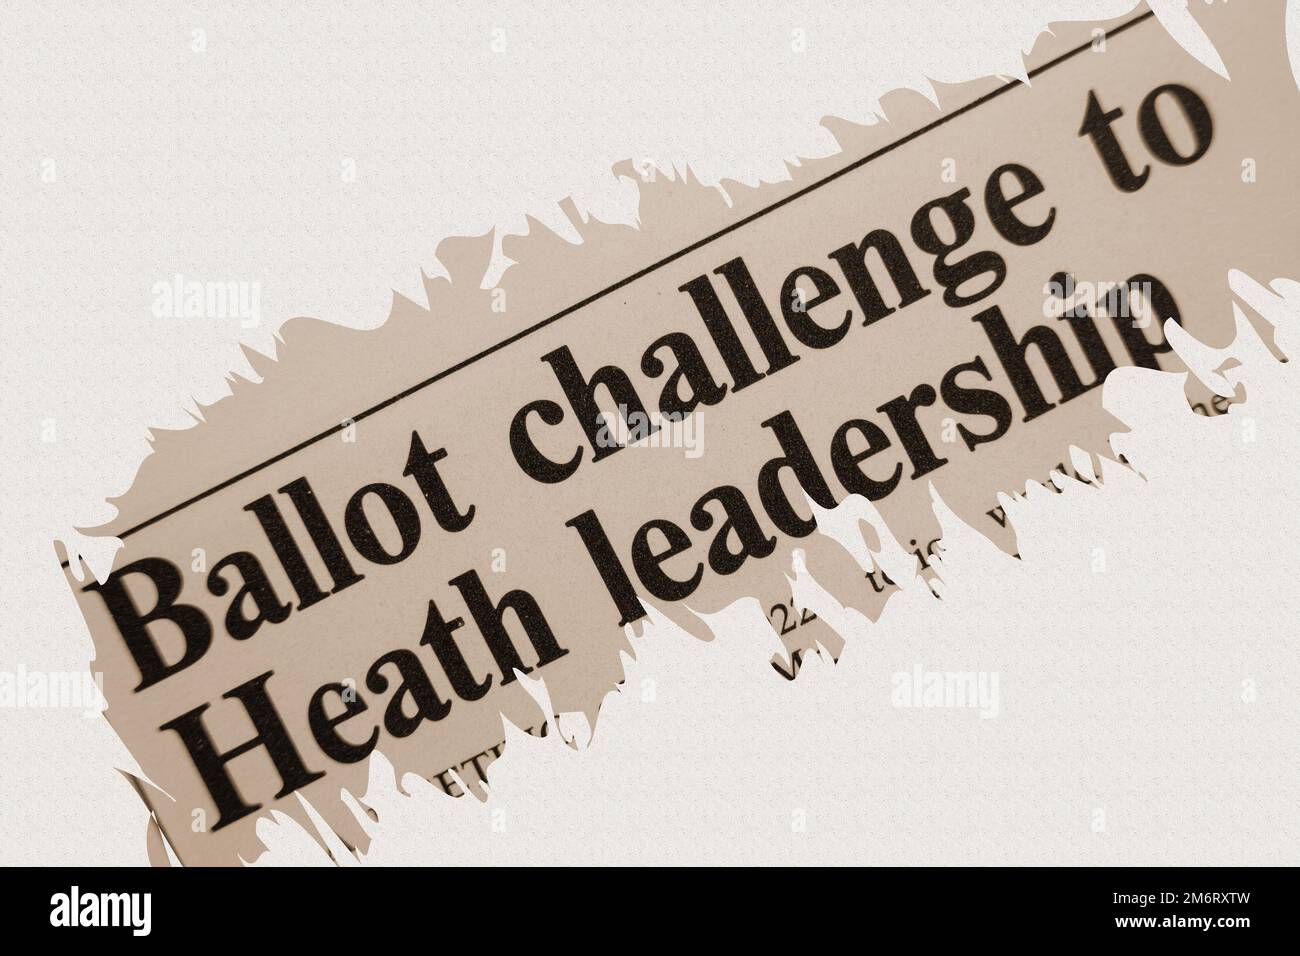 news story from 1975 newspaper headline article title - Ballot challenge to Heath leadership - sepia Stock Photo